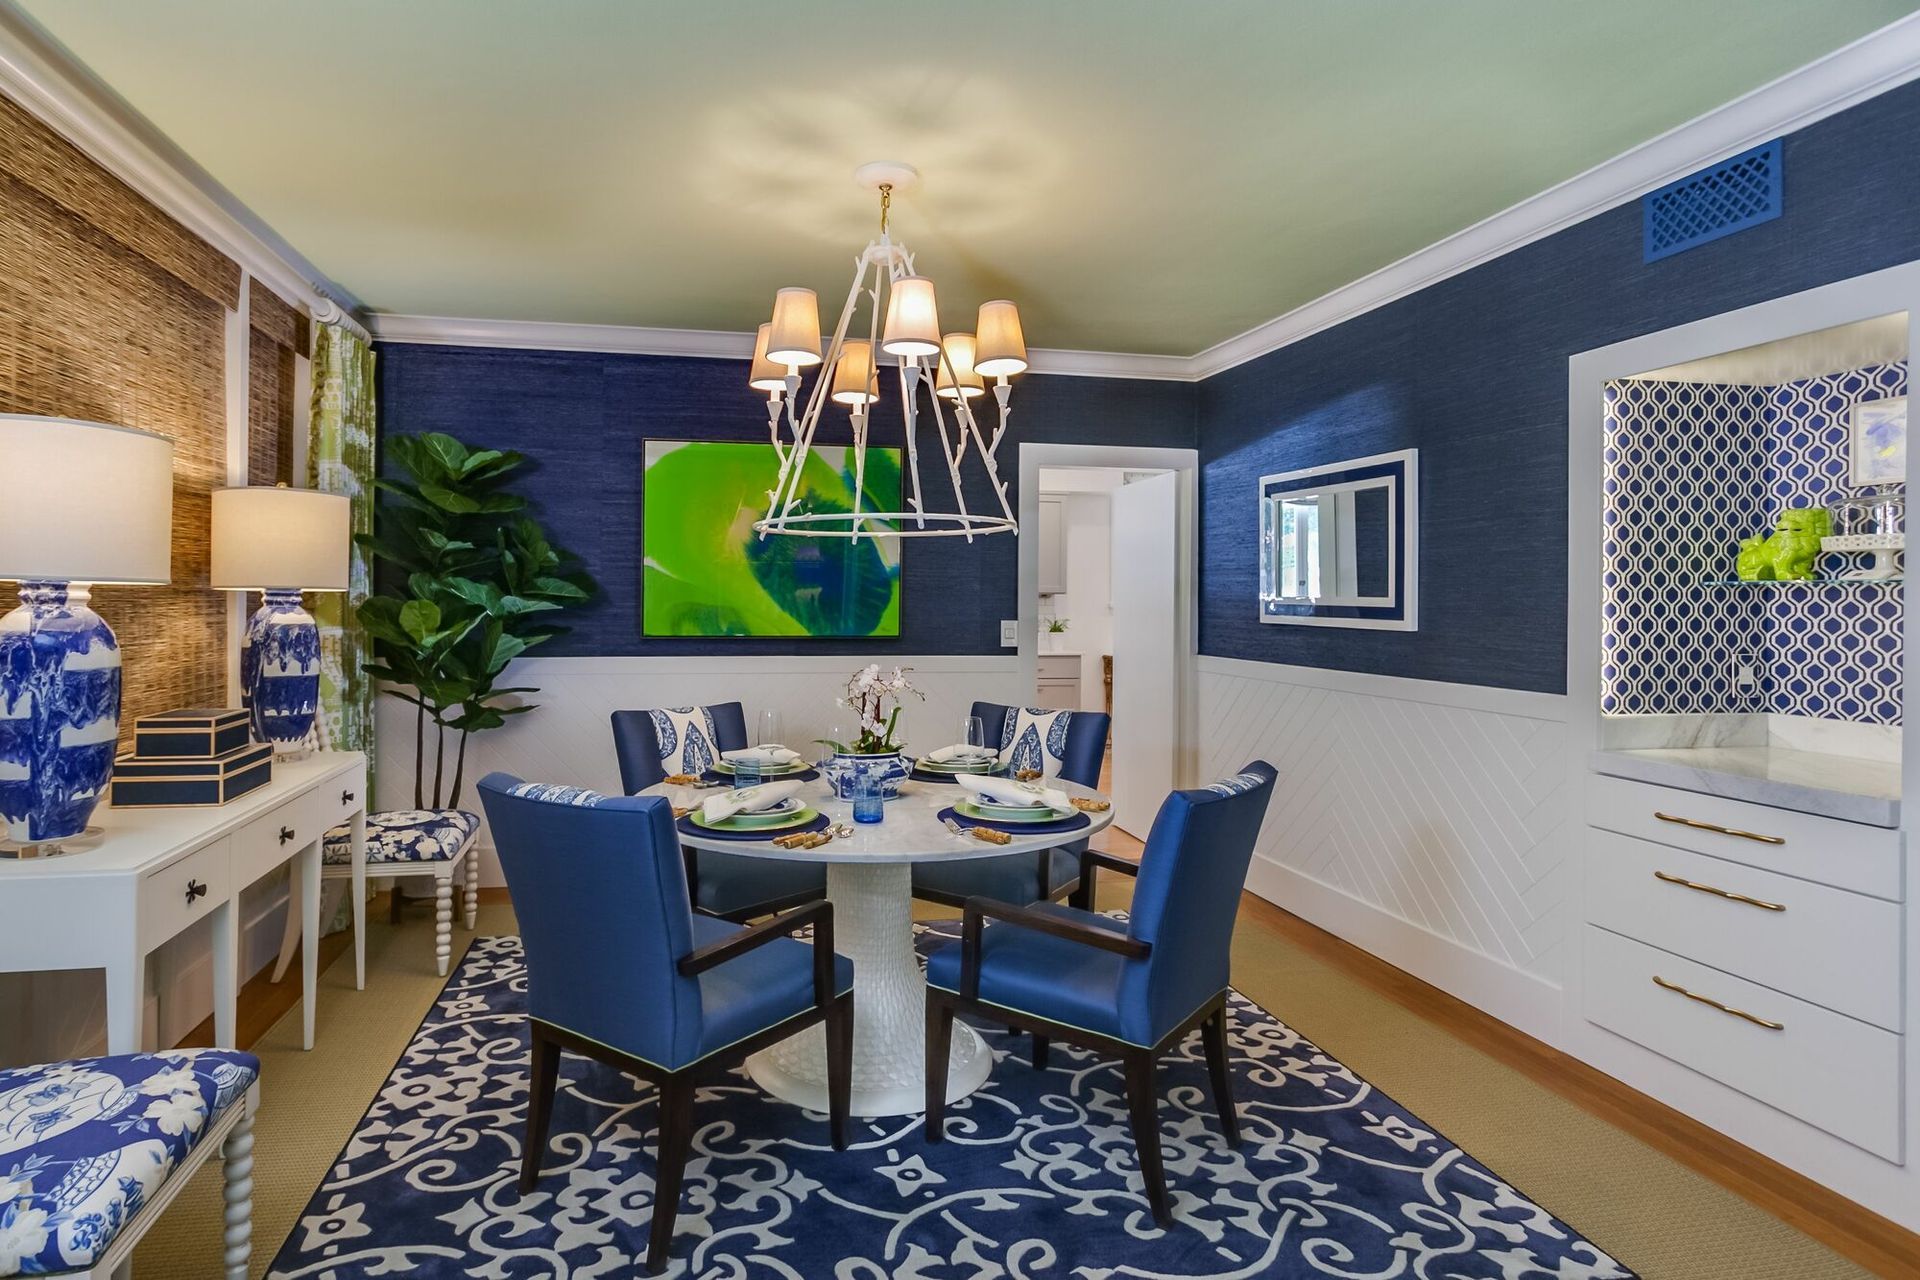 A dining room with a round table and blue chairs